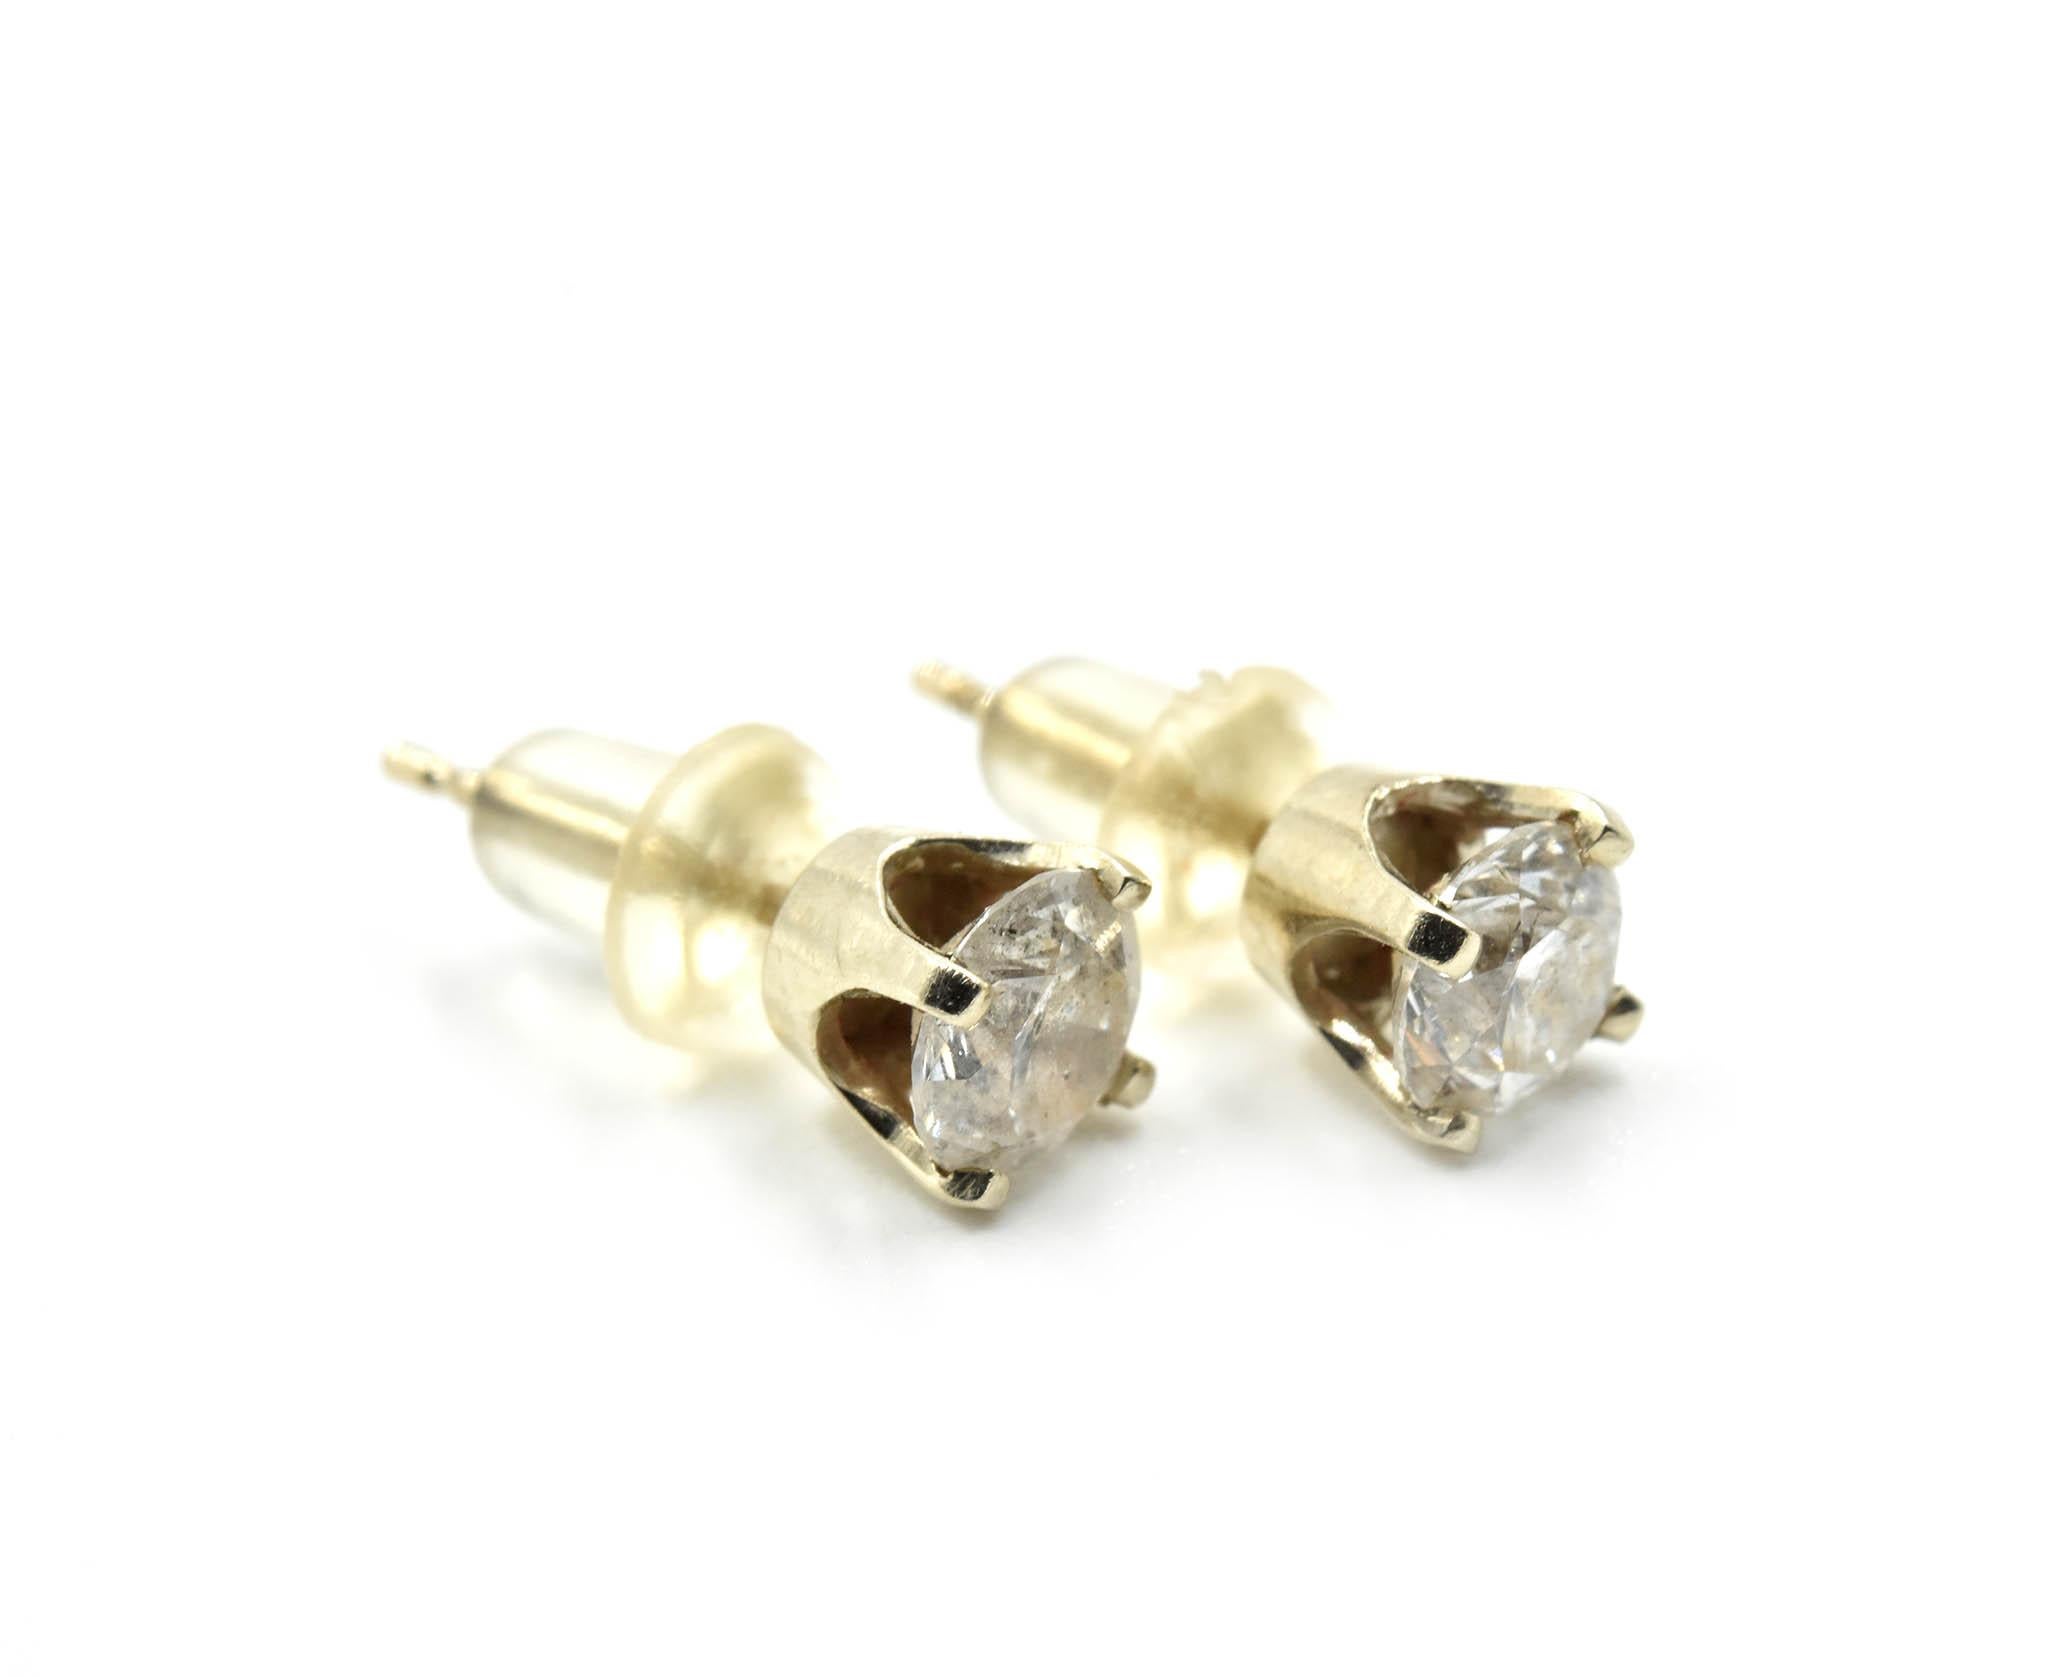 0.66 Carat Round Brilliant Diamond Stud Earrings 14 Karat Yellow Gold In Excellent Condition For Sale In Scottsdale, AZ